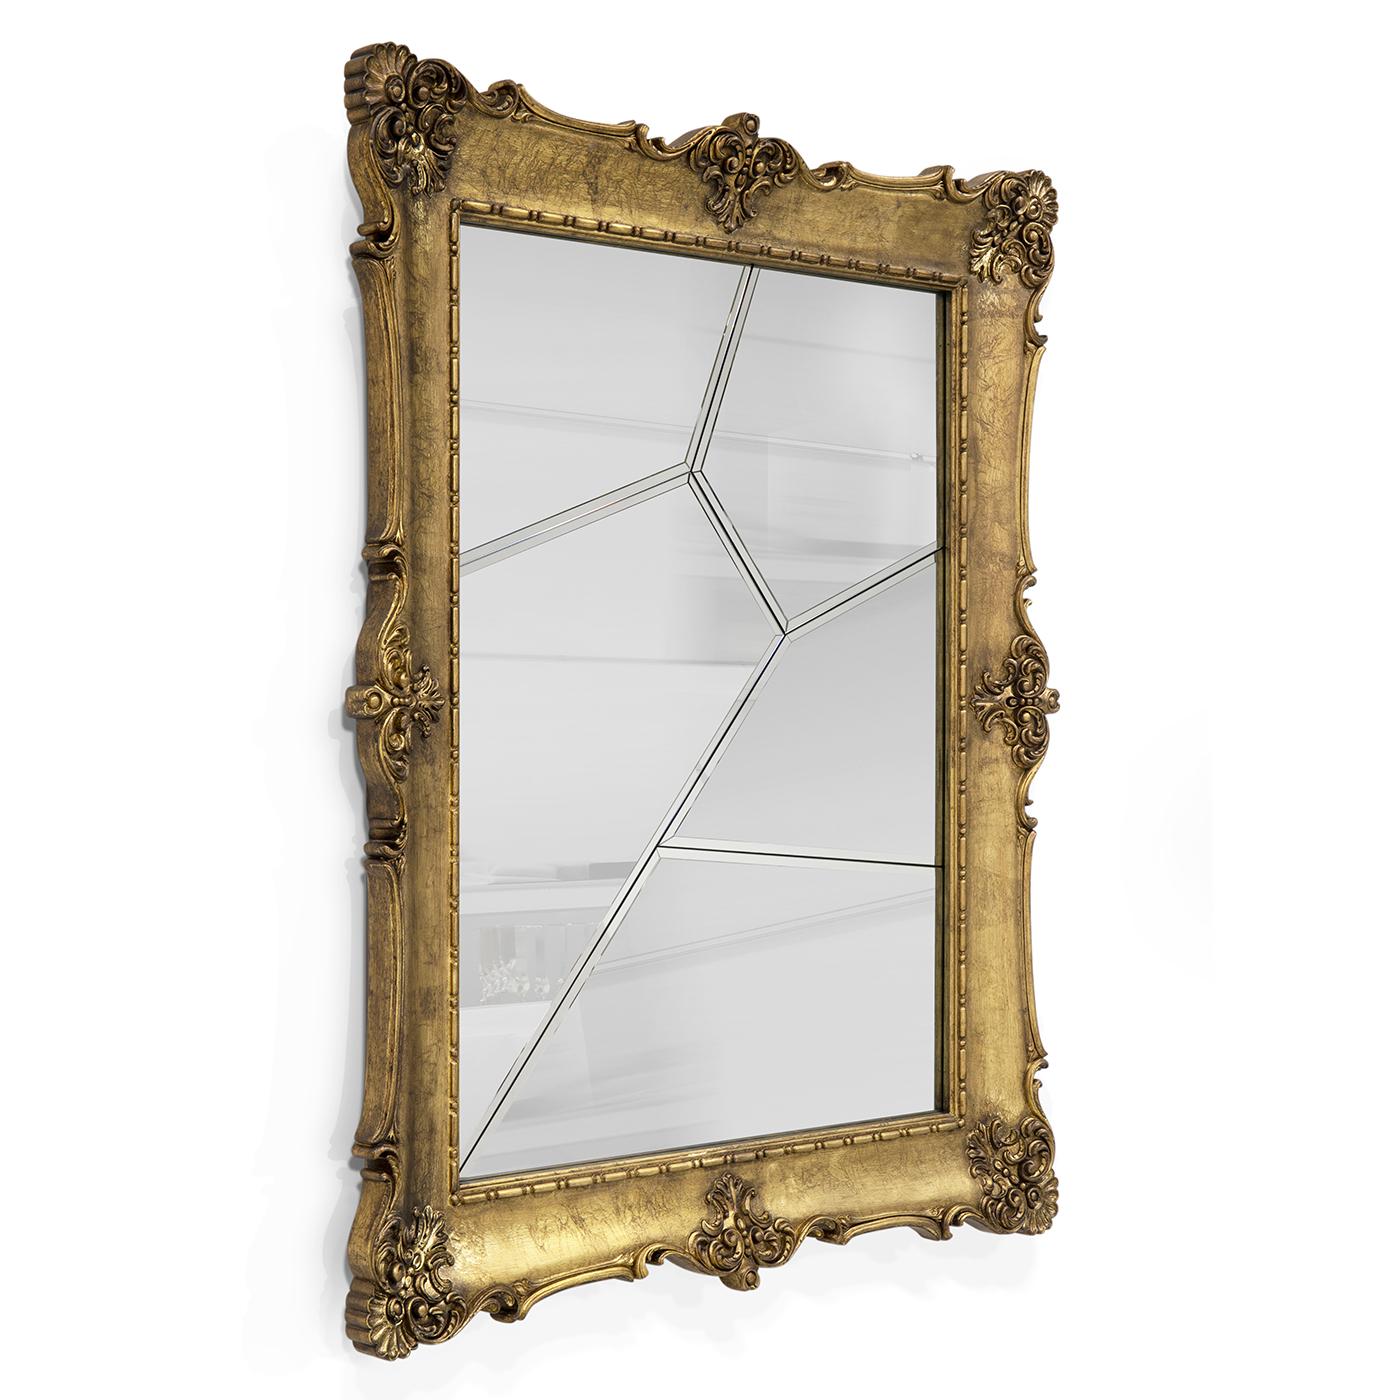 Mirror Shiver with solid wood structure in.
Aged brass finish. With fragmented bevelled. 
Mirror glass.